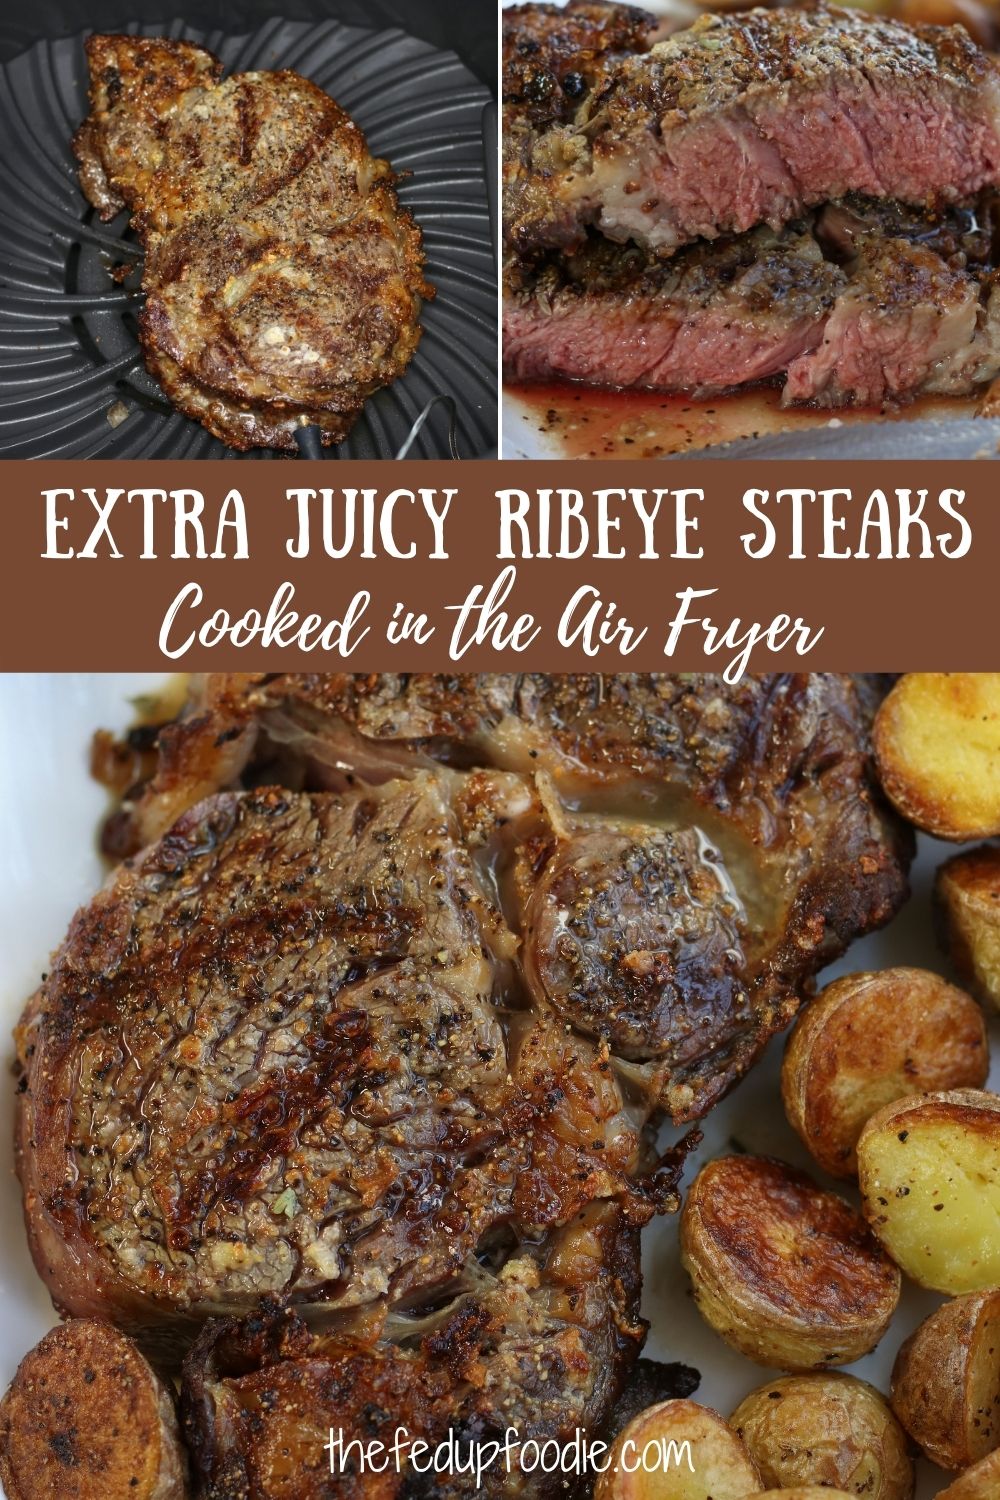 This Air Fryer Ribeye recipe creates extra flavorful and juicy ribeye steaks done to perfection. Instructions include how to marinate and cook to an internal doneness of your choosing. Once you cook steak in an air fryer, you will never want to prepare it any other way. #AirFryerRibeyeSteak #AirFryerRibeyeSteakMediumRare #AirFryerRibeyeSteakMedium #AirFryerRibeyeSteakMediumWell #AirfryerSteakRecipes 